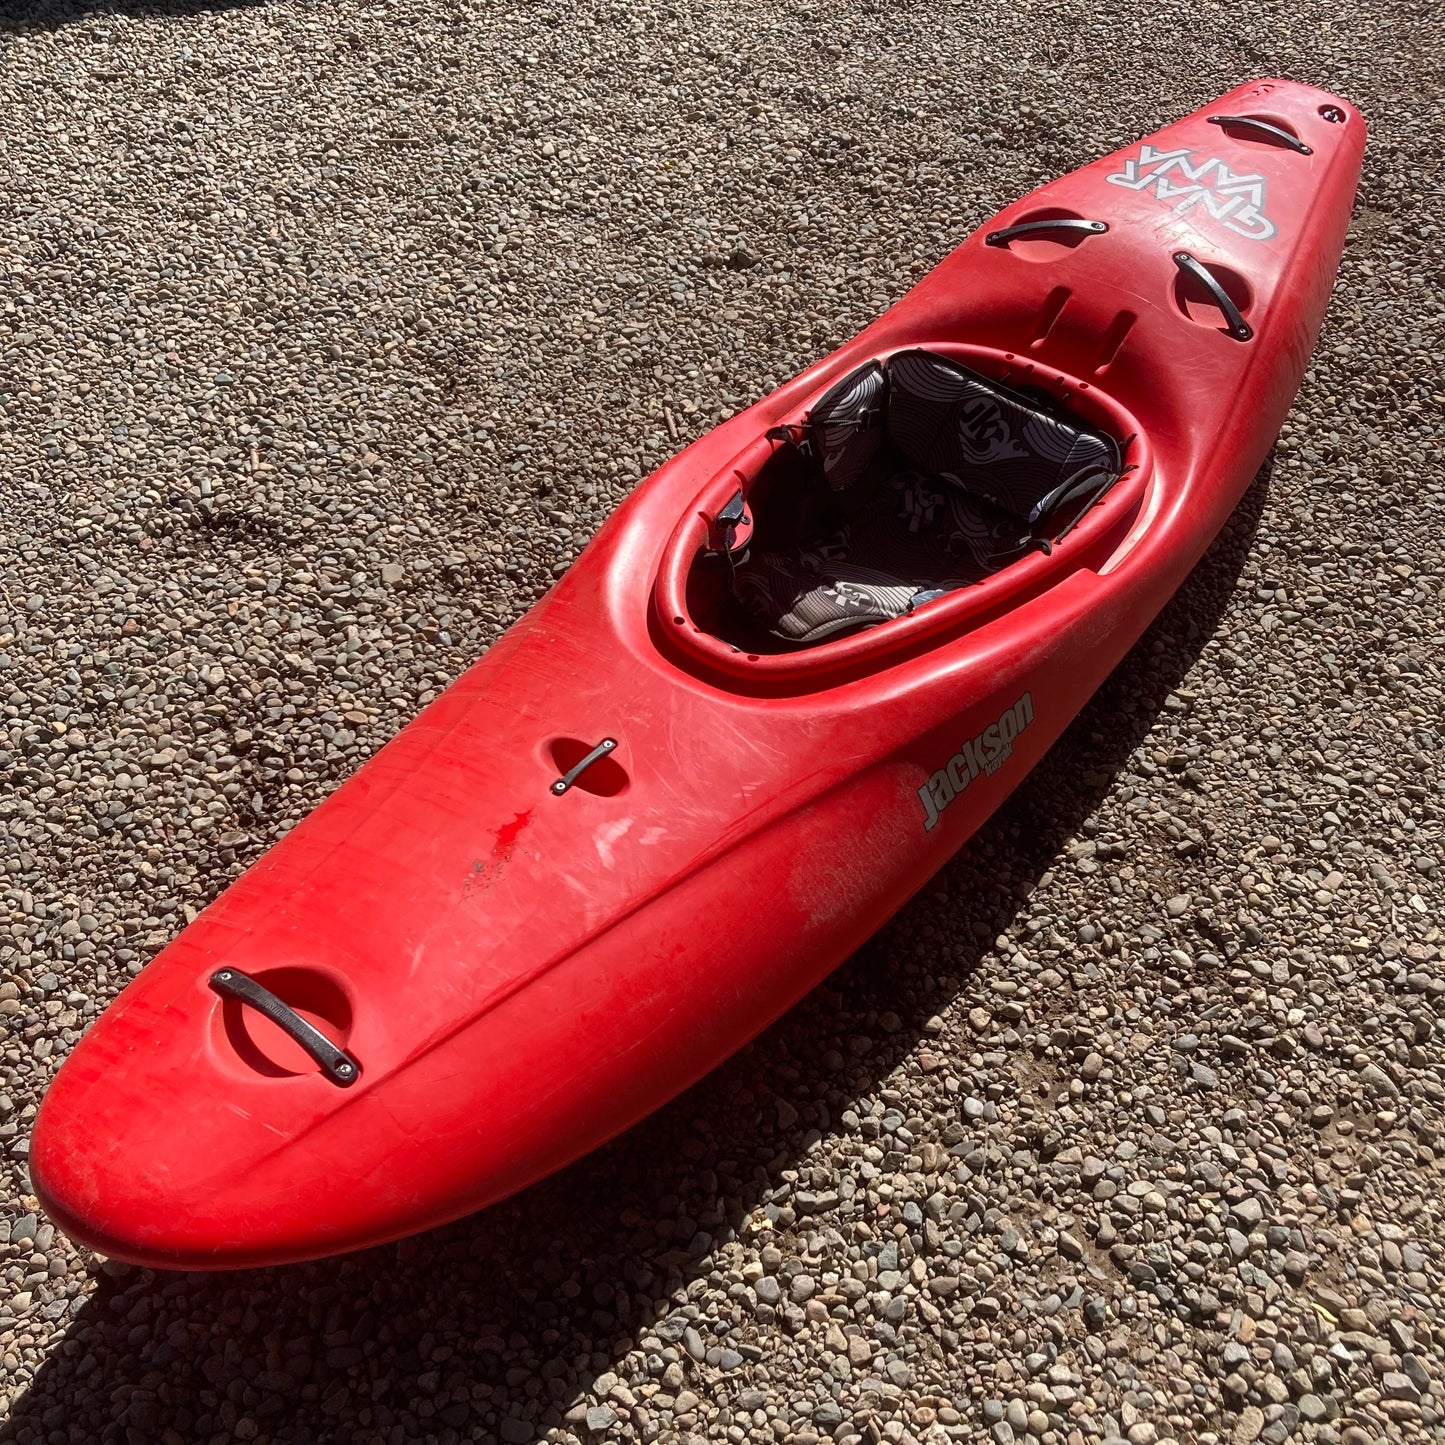 A red Demo Gnarvana SM kayak sitting on a gravel road.